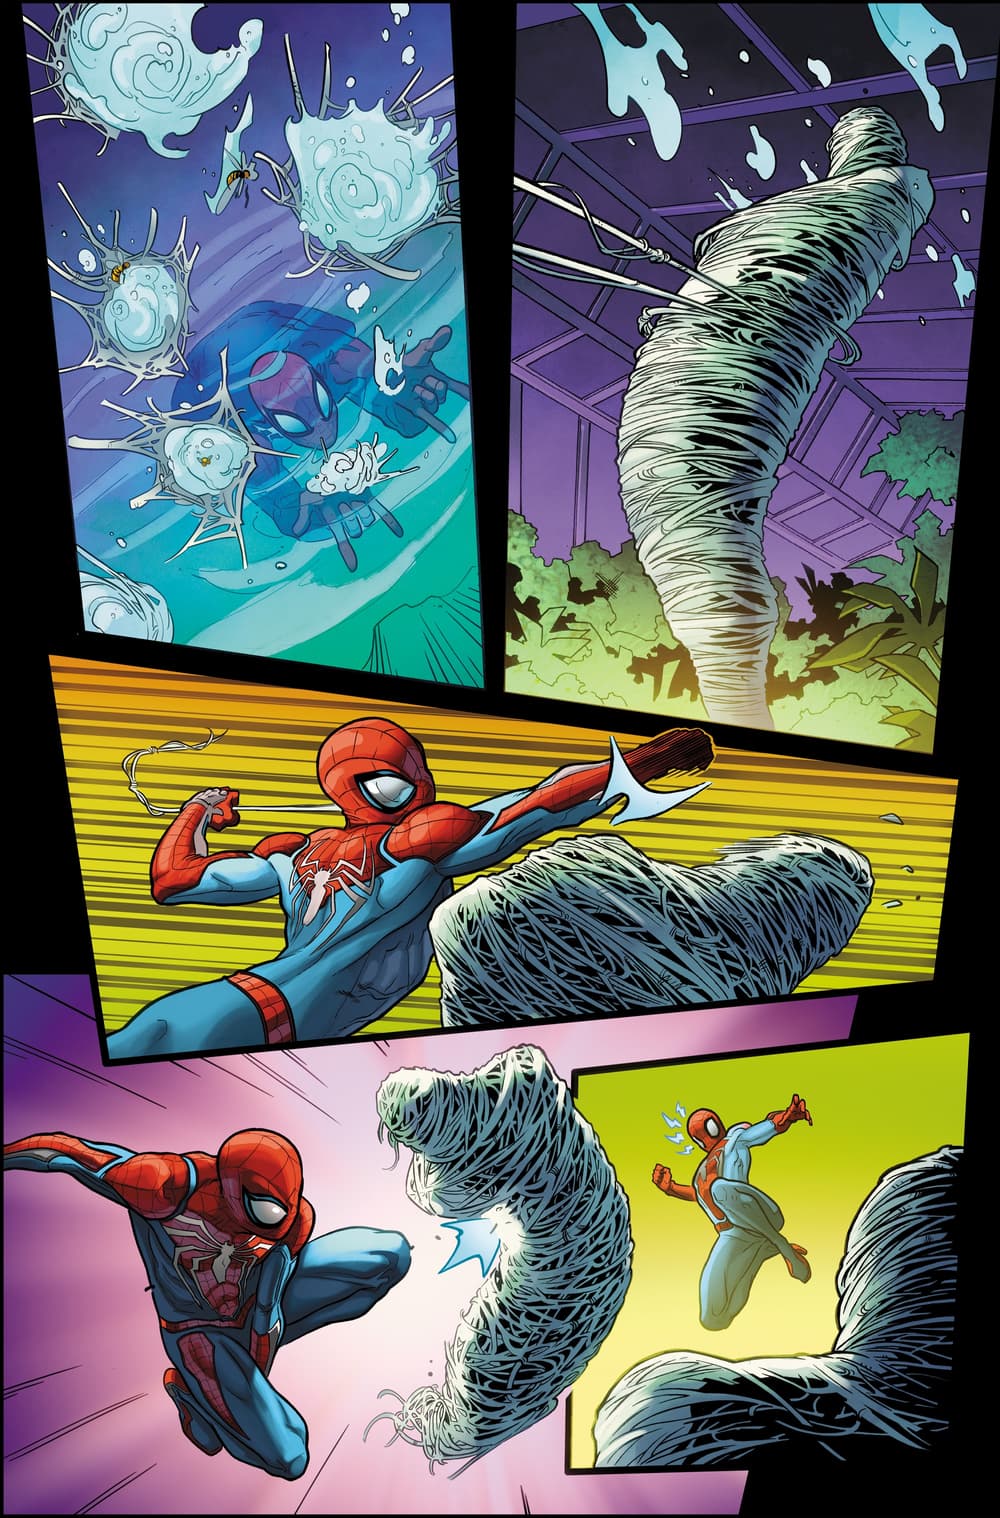 MARVEL'S SPIDER-MAN: VELOCITY #1 pencils by Emilio Laiso with colors by Rachelle Rosenberg